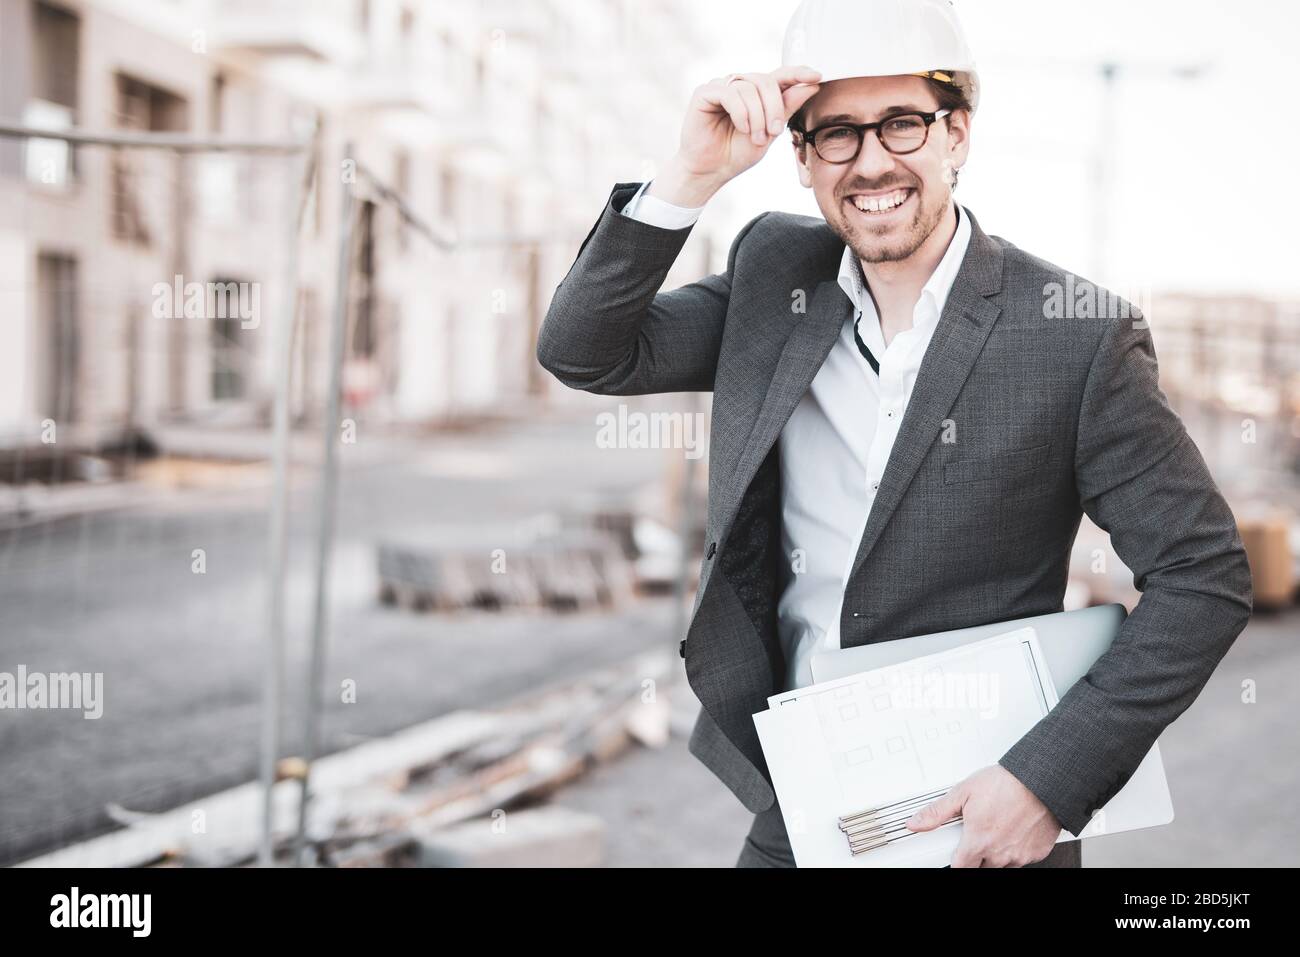 Young and attractive architect / civil engineer at work on a construction site Stock Photo